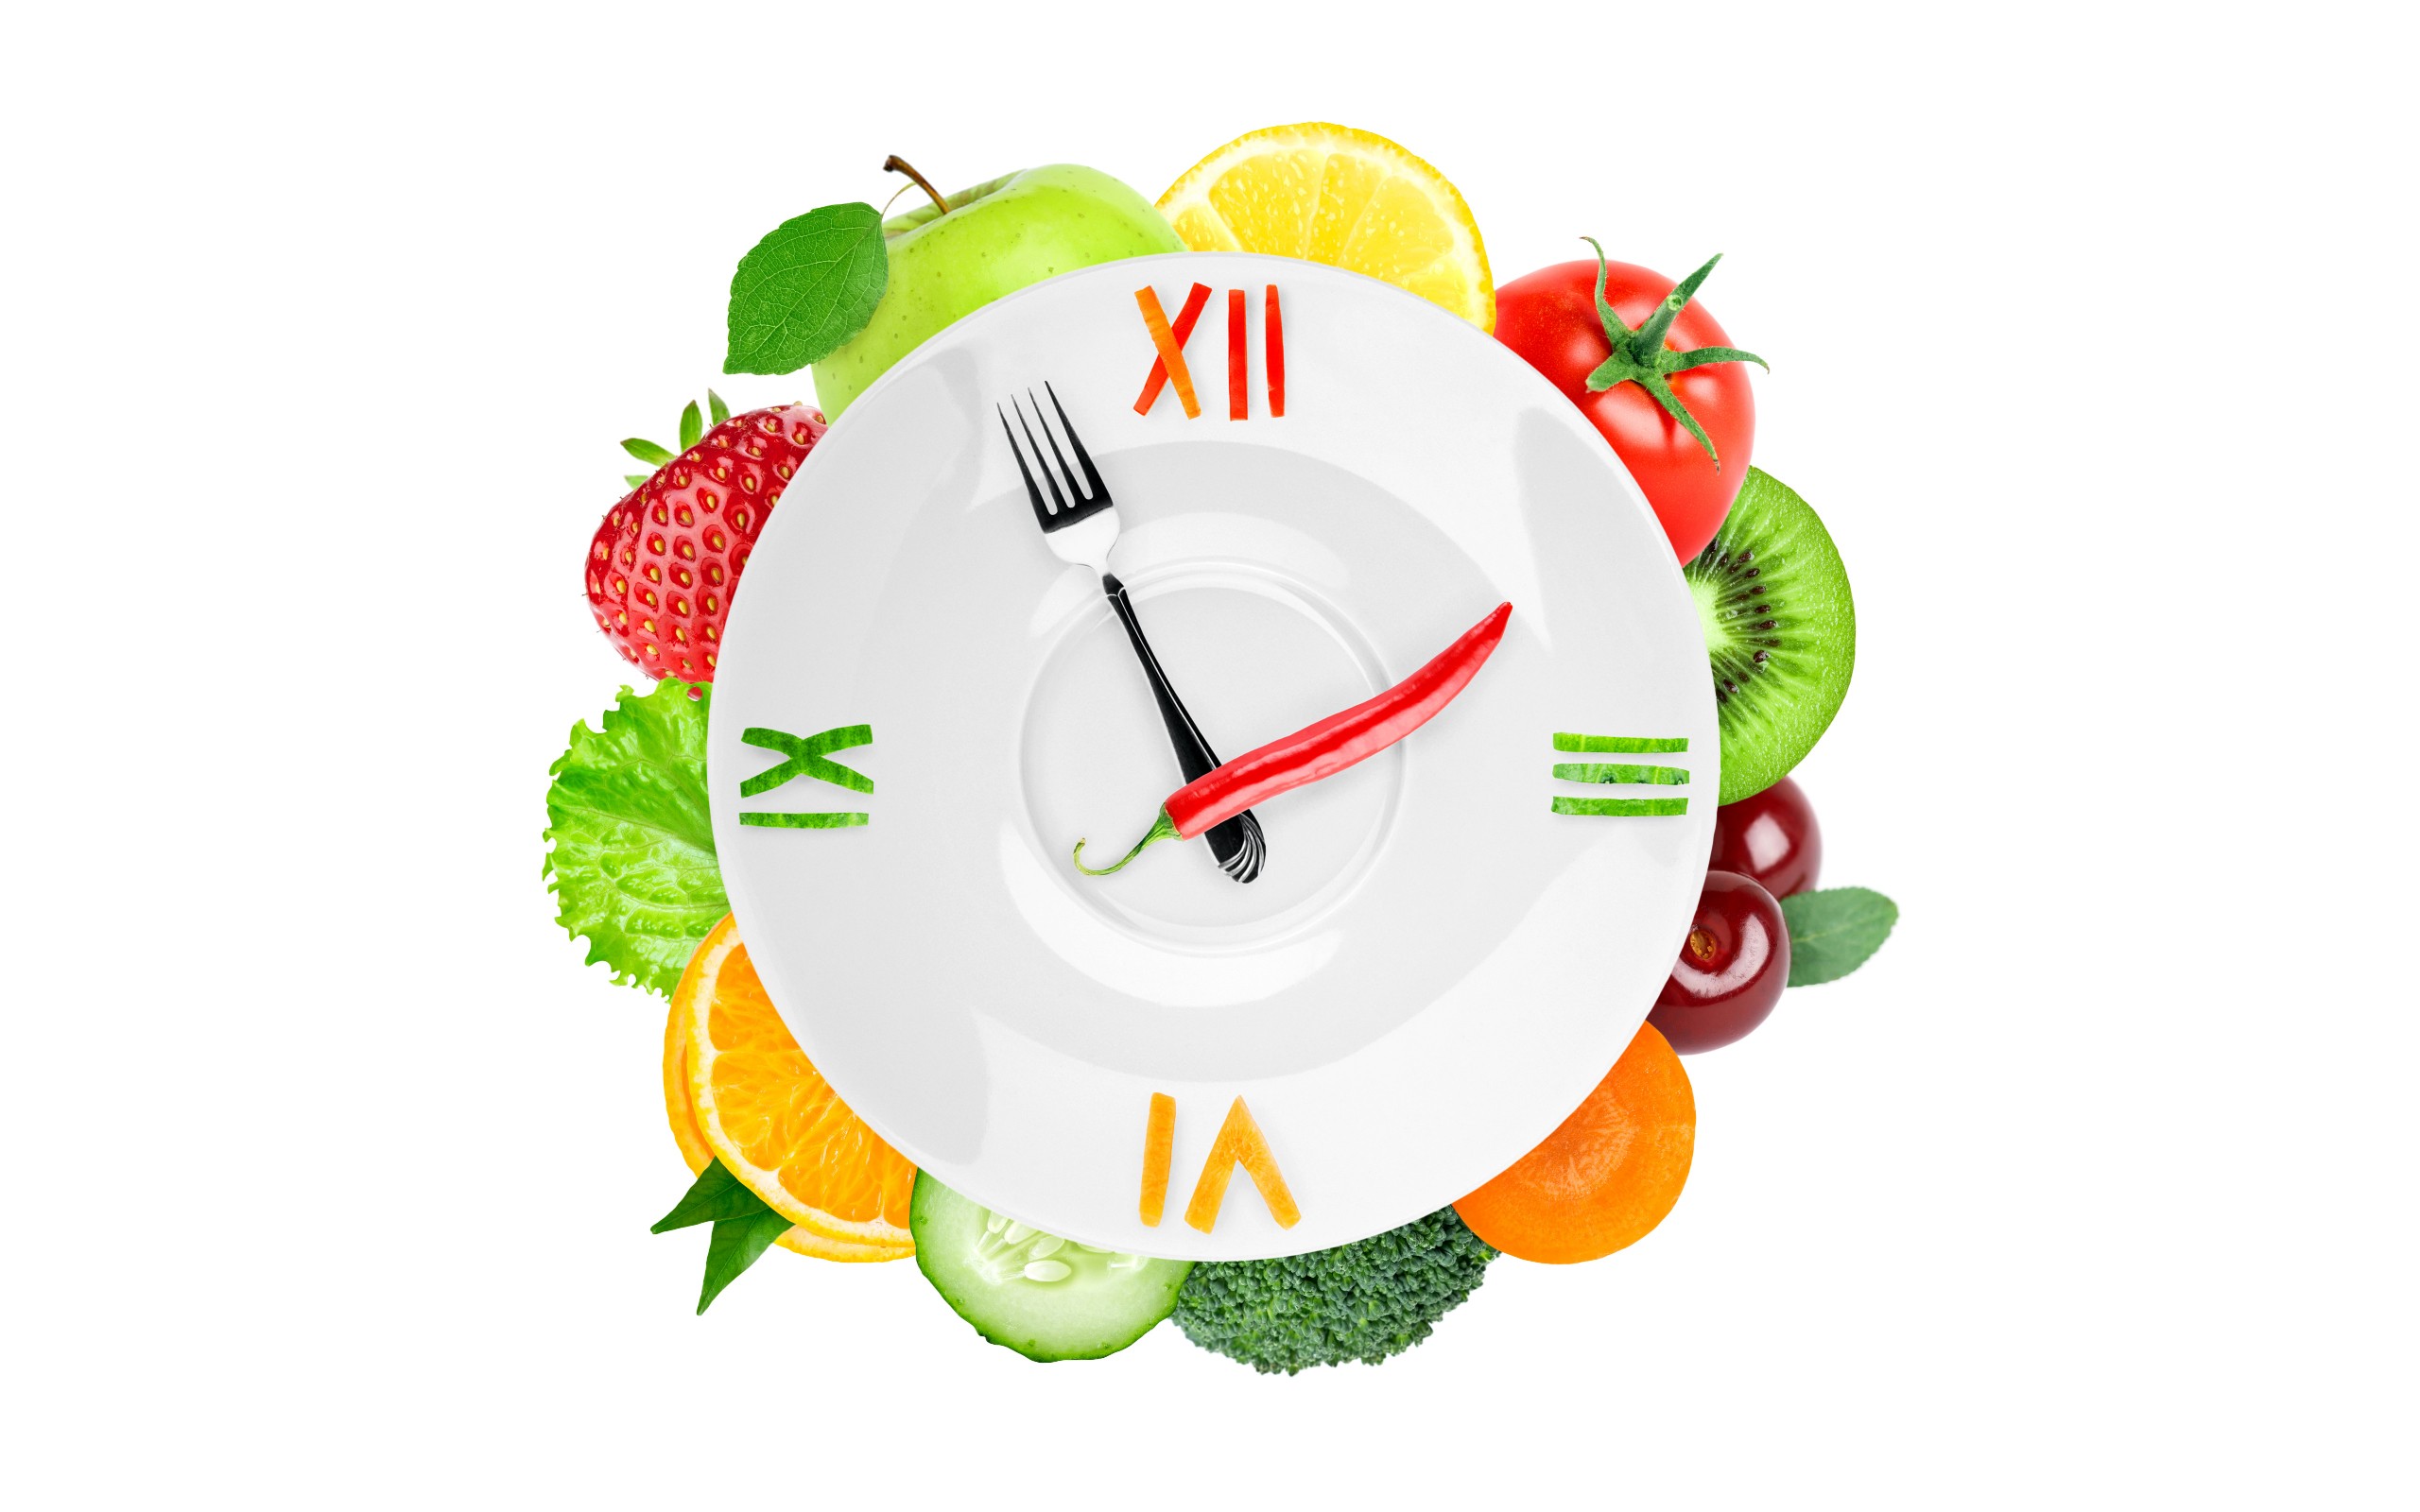 General 2560x1600 fruit food white background clocks vegetables plates fork chilli peppers simple background